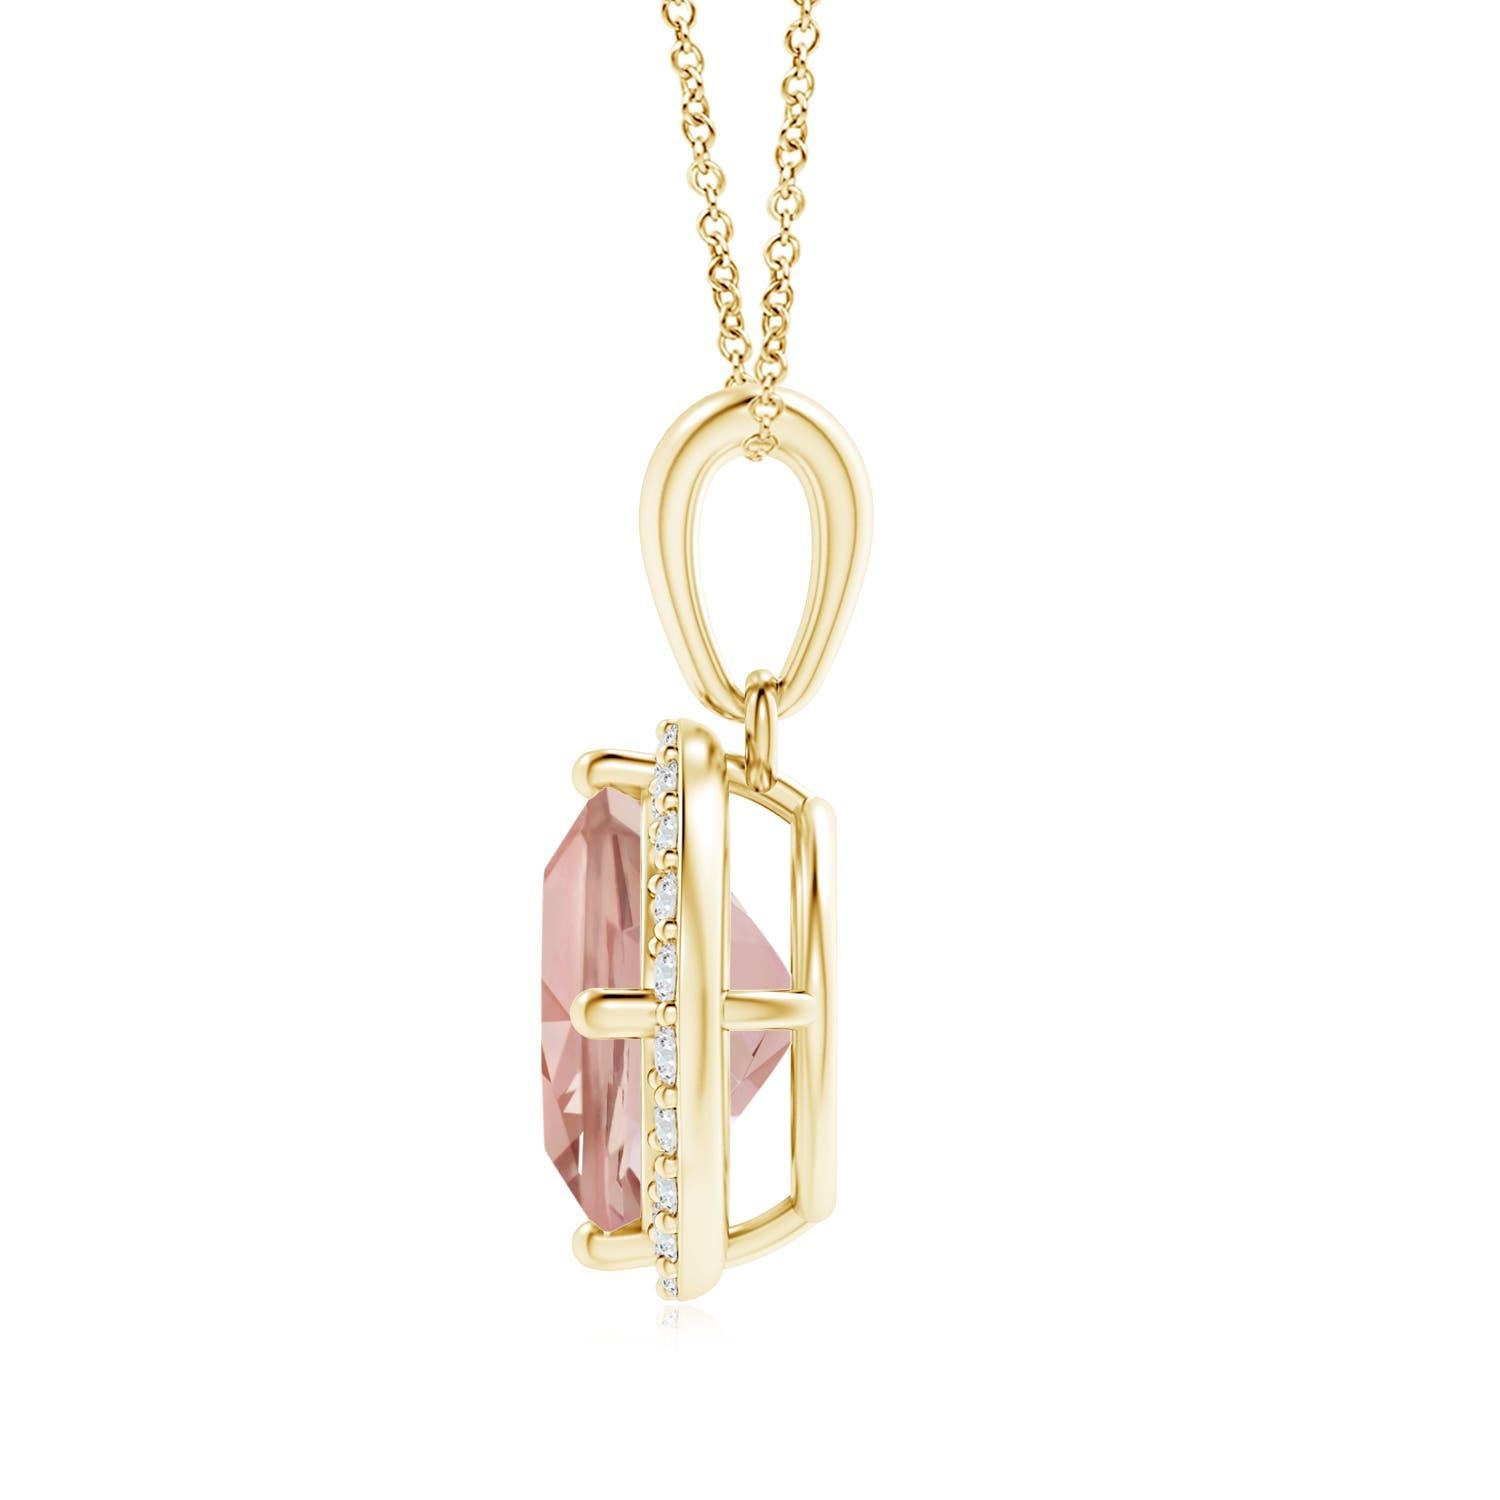 Hanging from a plain lustrous bale, this morganite and diamond halo pendant in 18k yellow gold exudes a distinctive appeal. The cushion morganite is secured sideways in a claw prong setting and surrounded by a halo of diamond accents.
